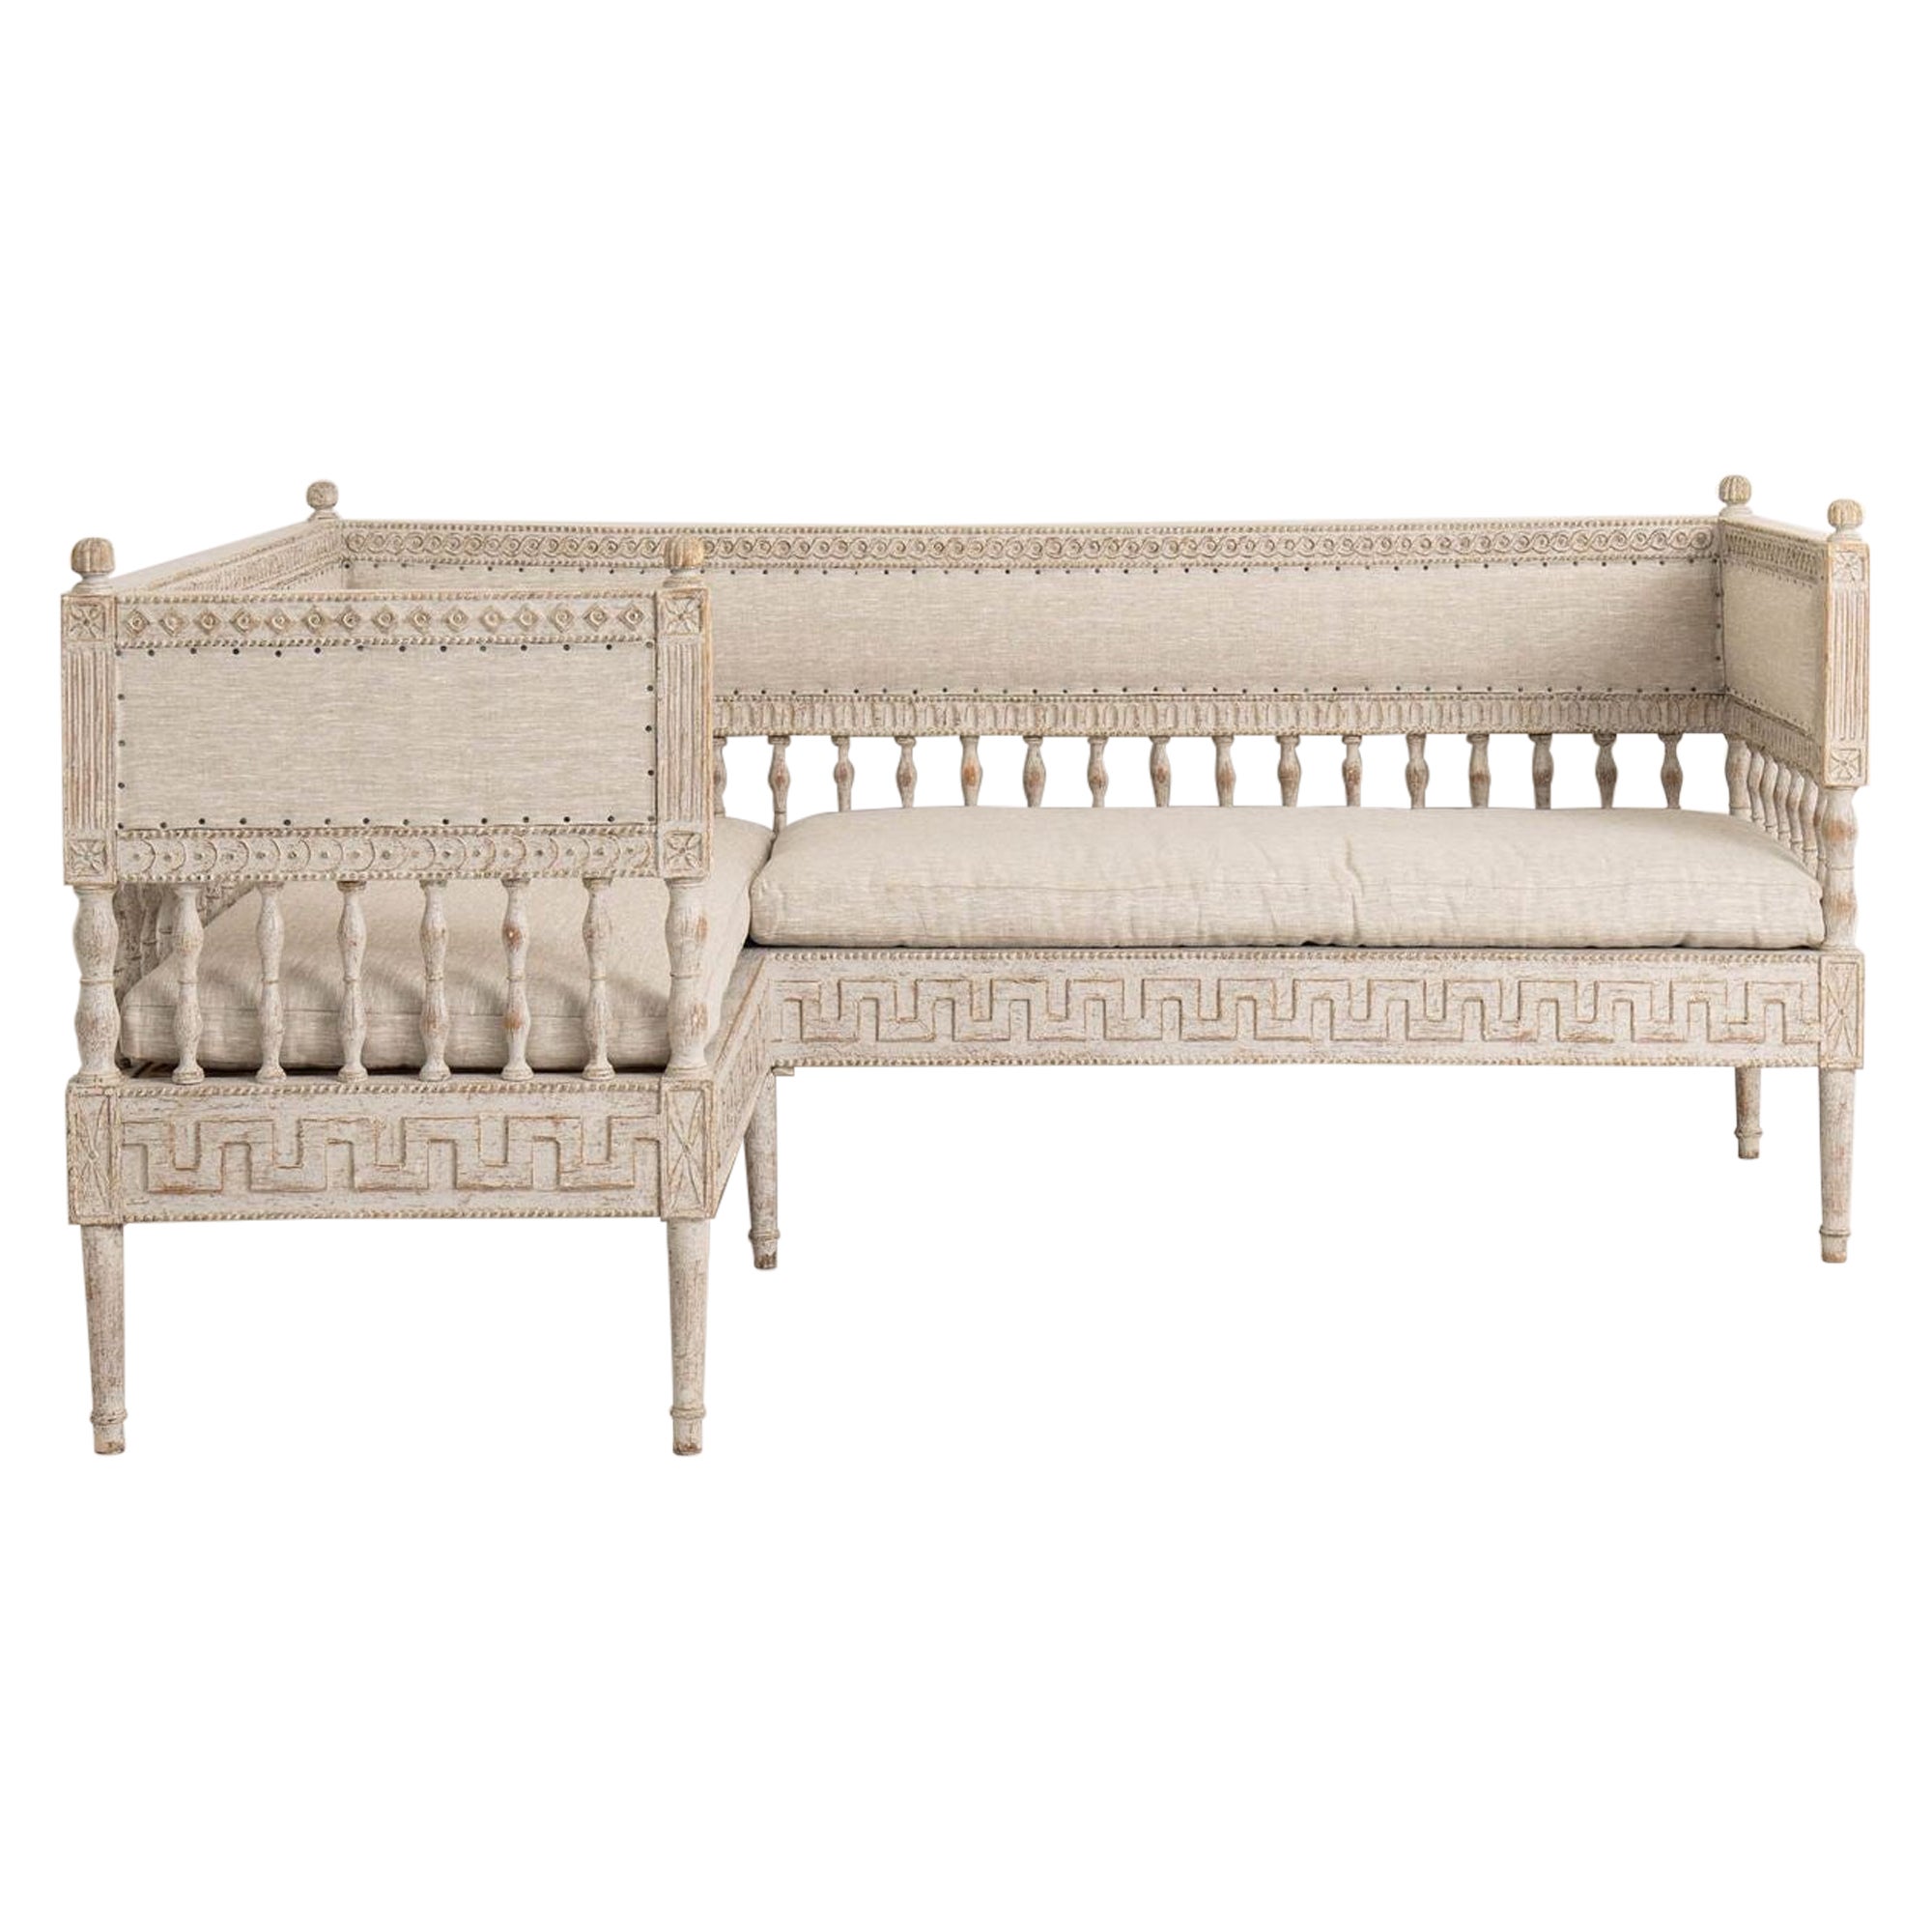 18th c. Swedish Gustavian Period Painted Corner Banquette For Sale